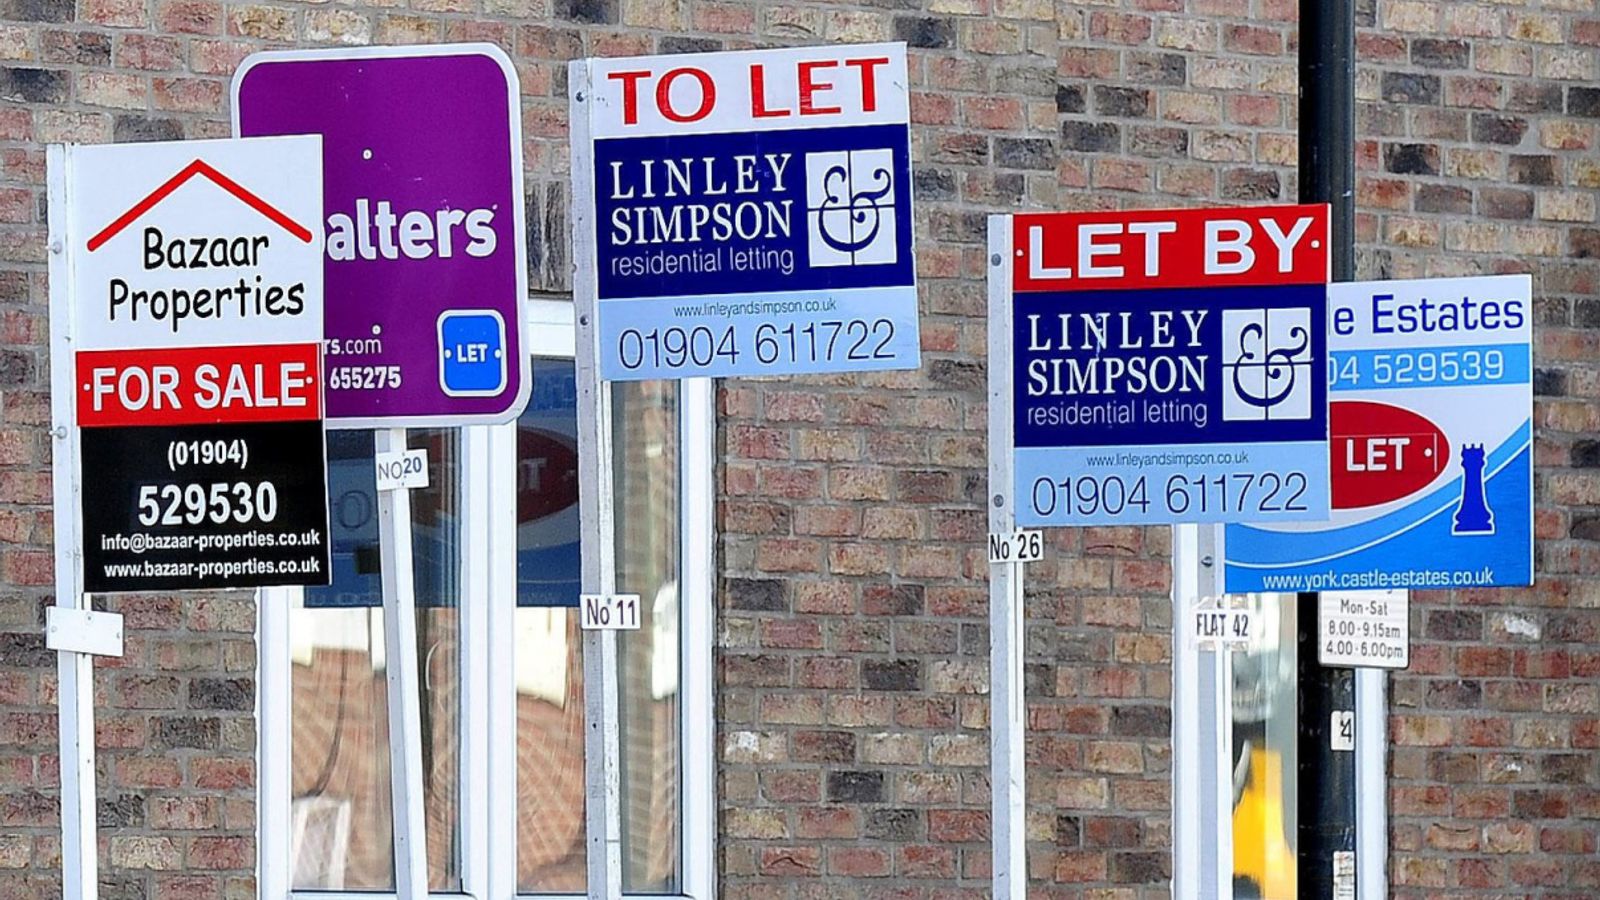 House prices continue fall but saving for a deposit remains difficult